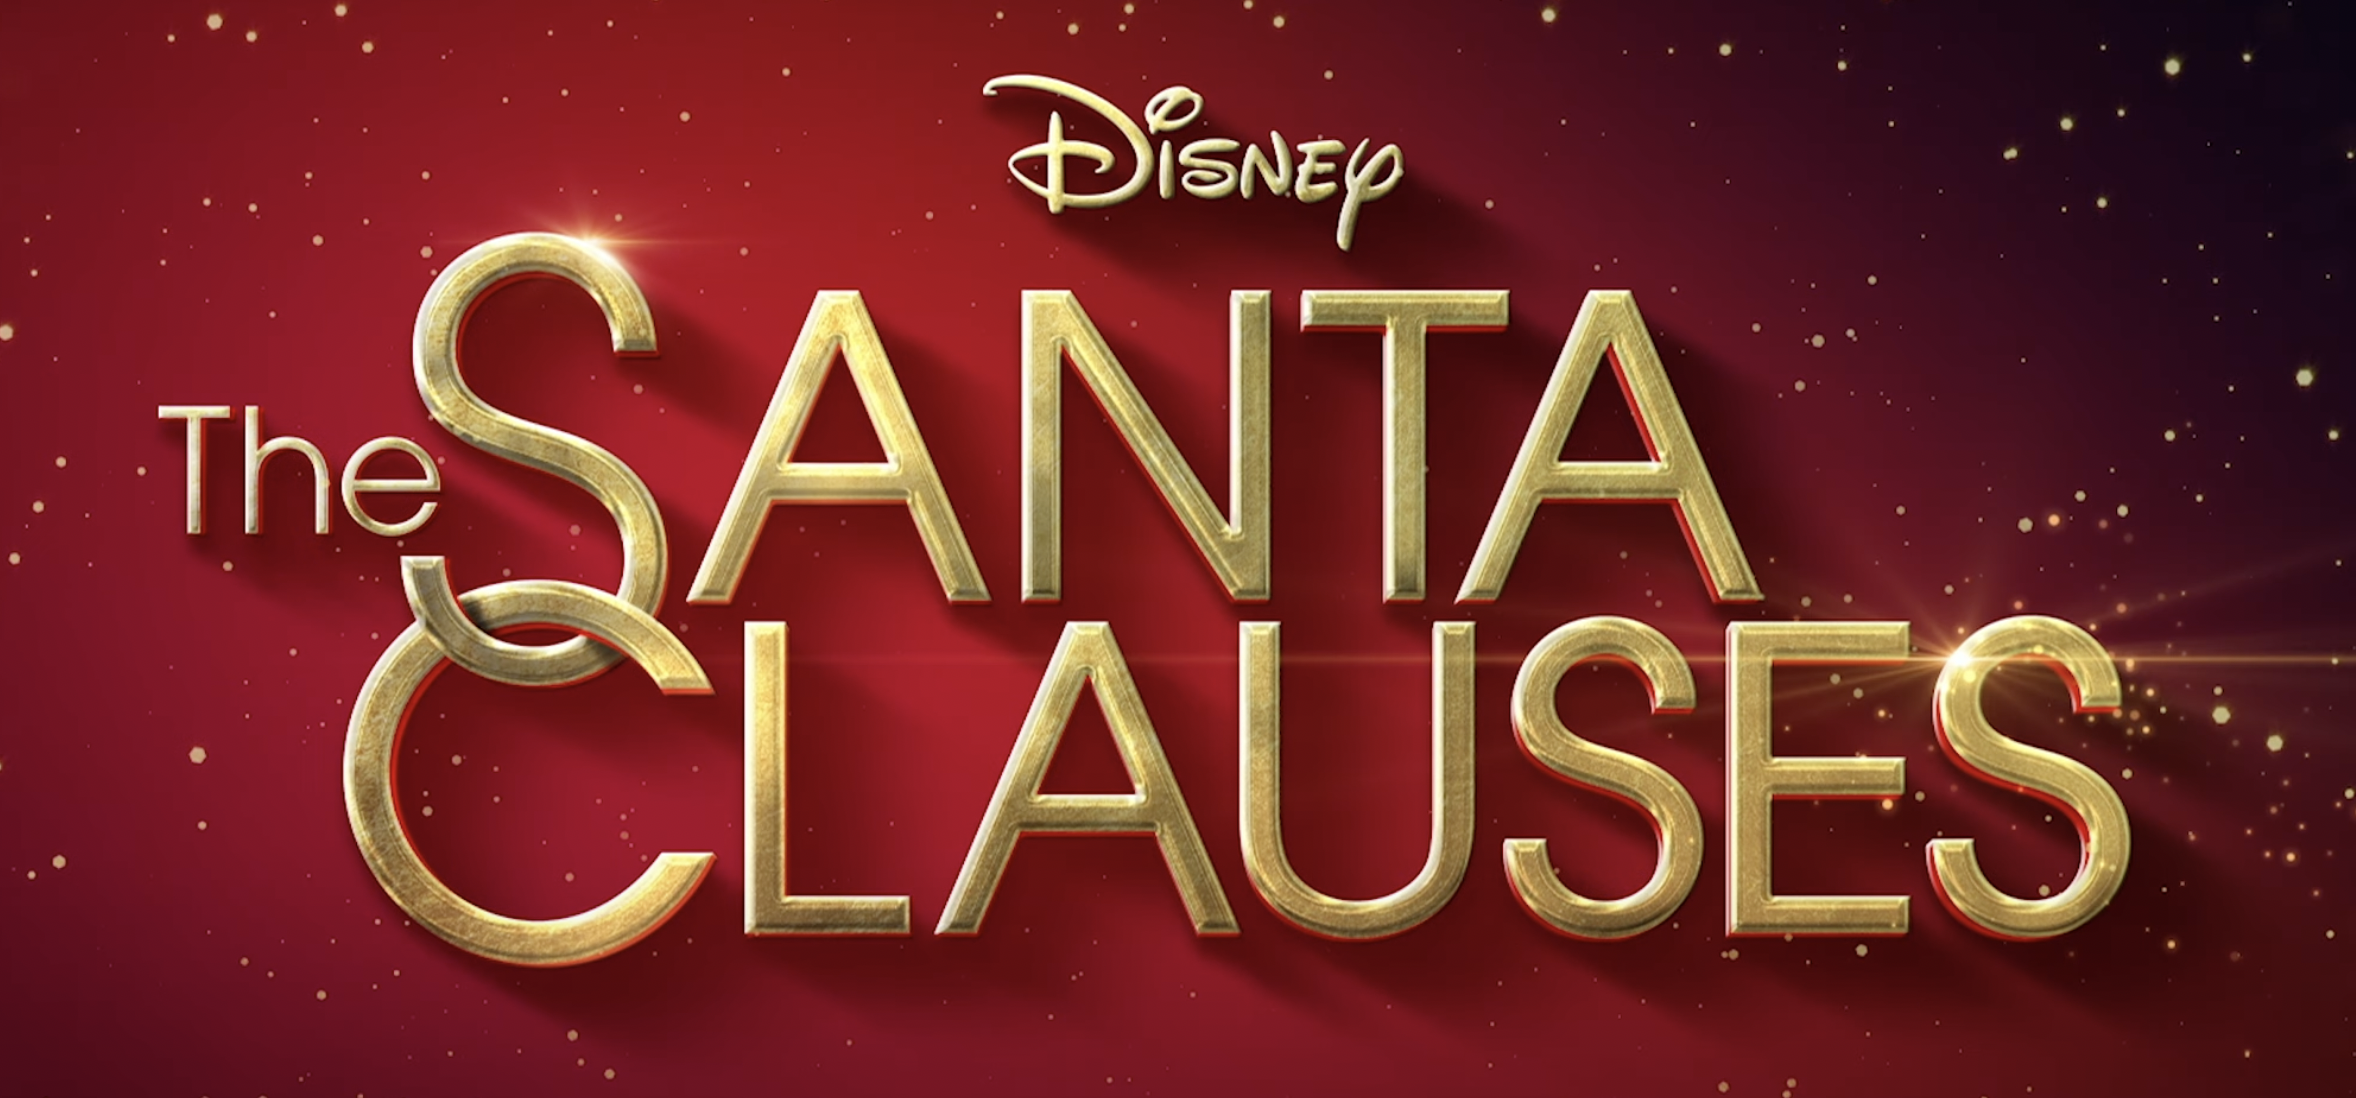 The First Trailer For ‘The Santa Clauses’ Arrives, Series To Premiere This Holiday Season